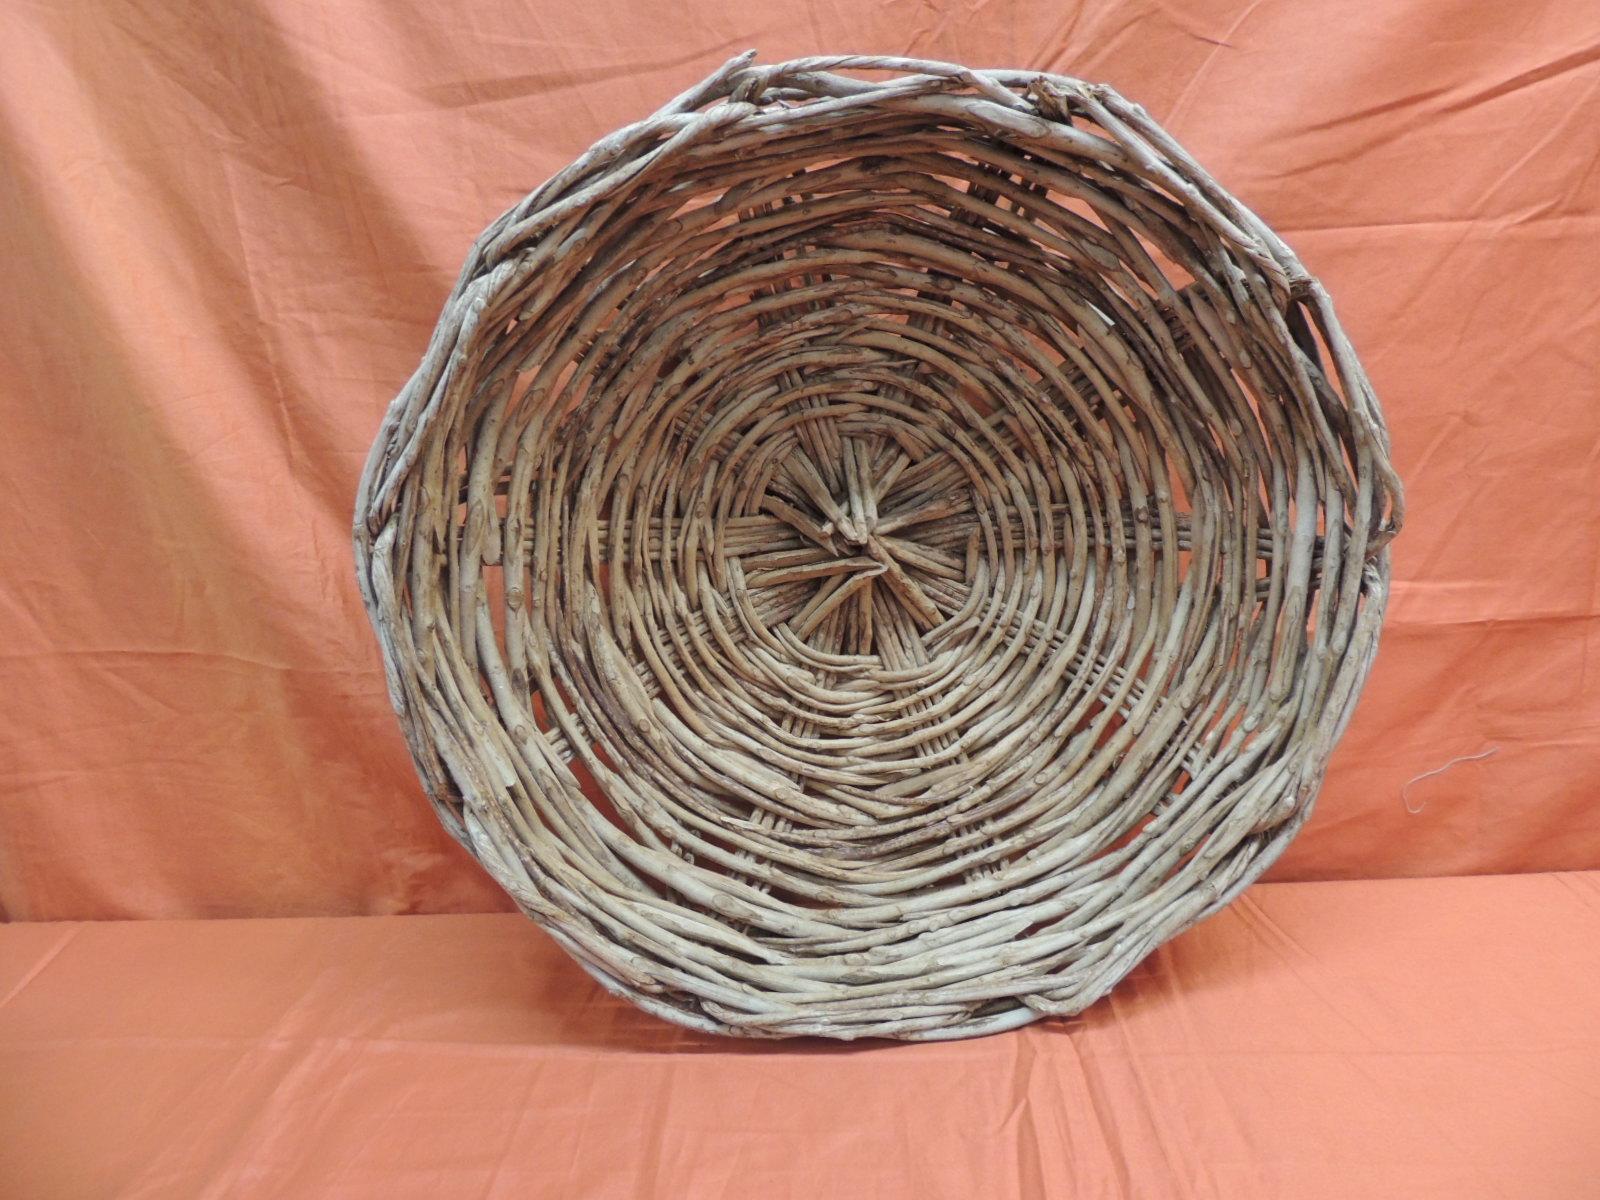 Vintage large round rustic style willow woven basket/ bowl.
Size: 18